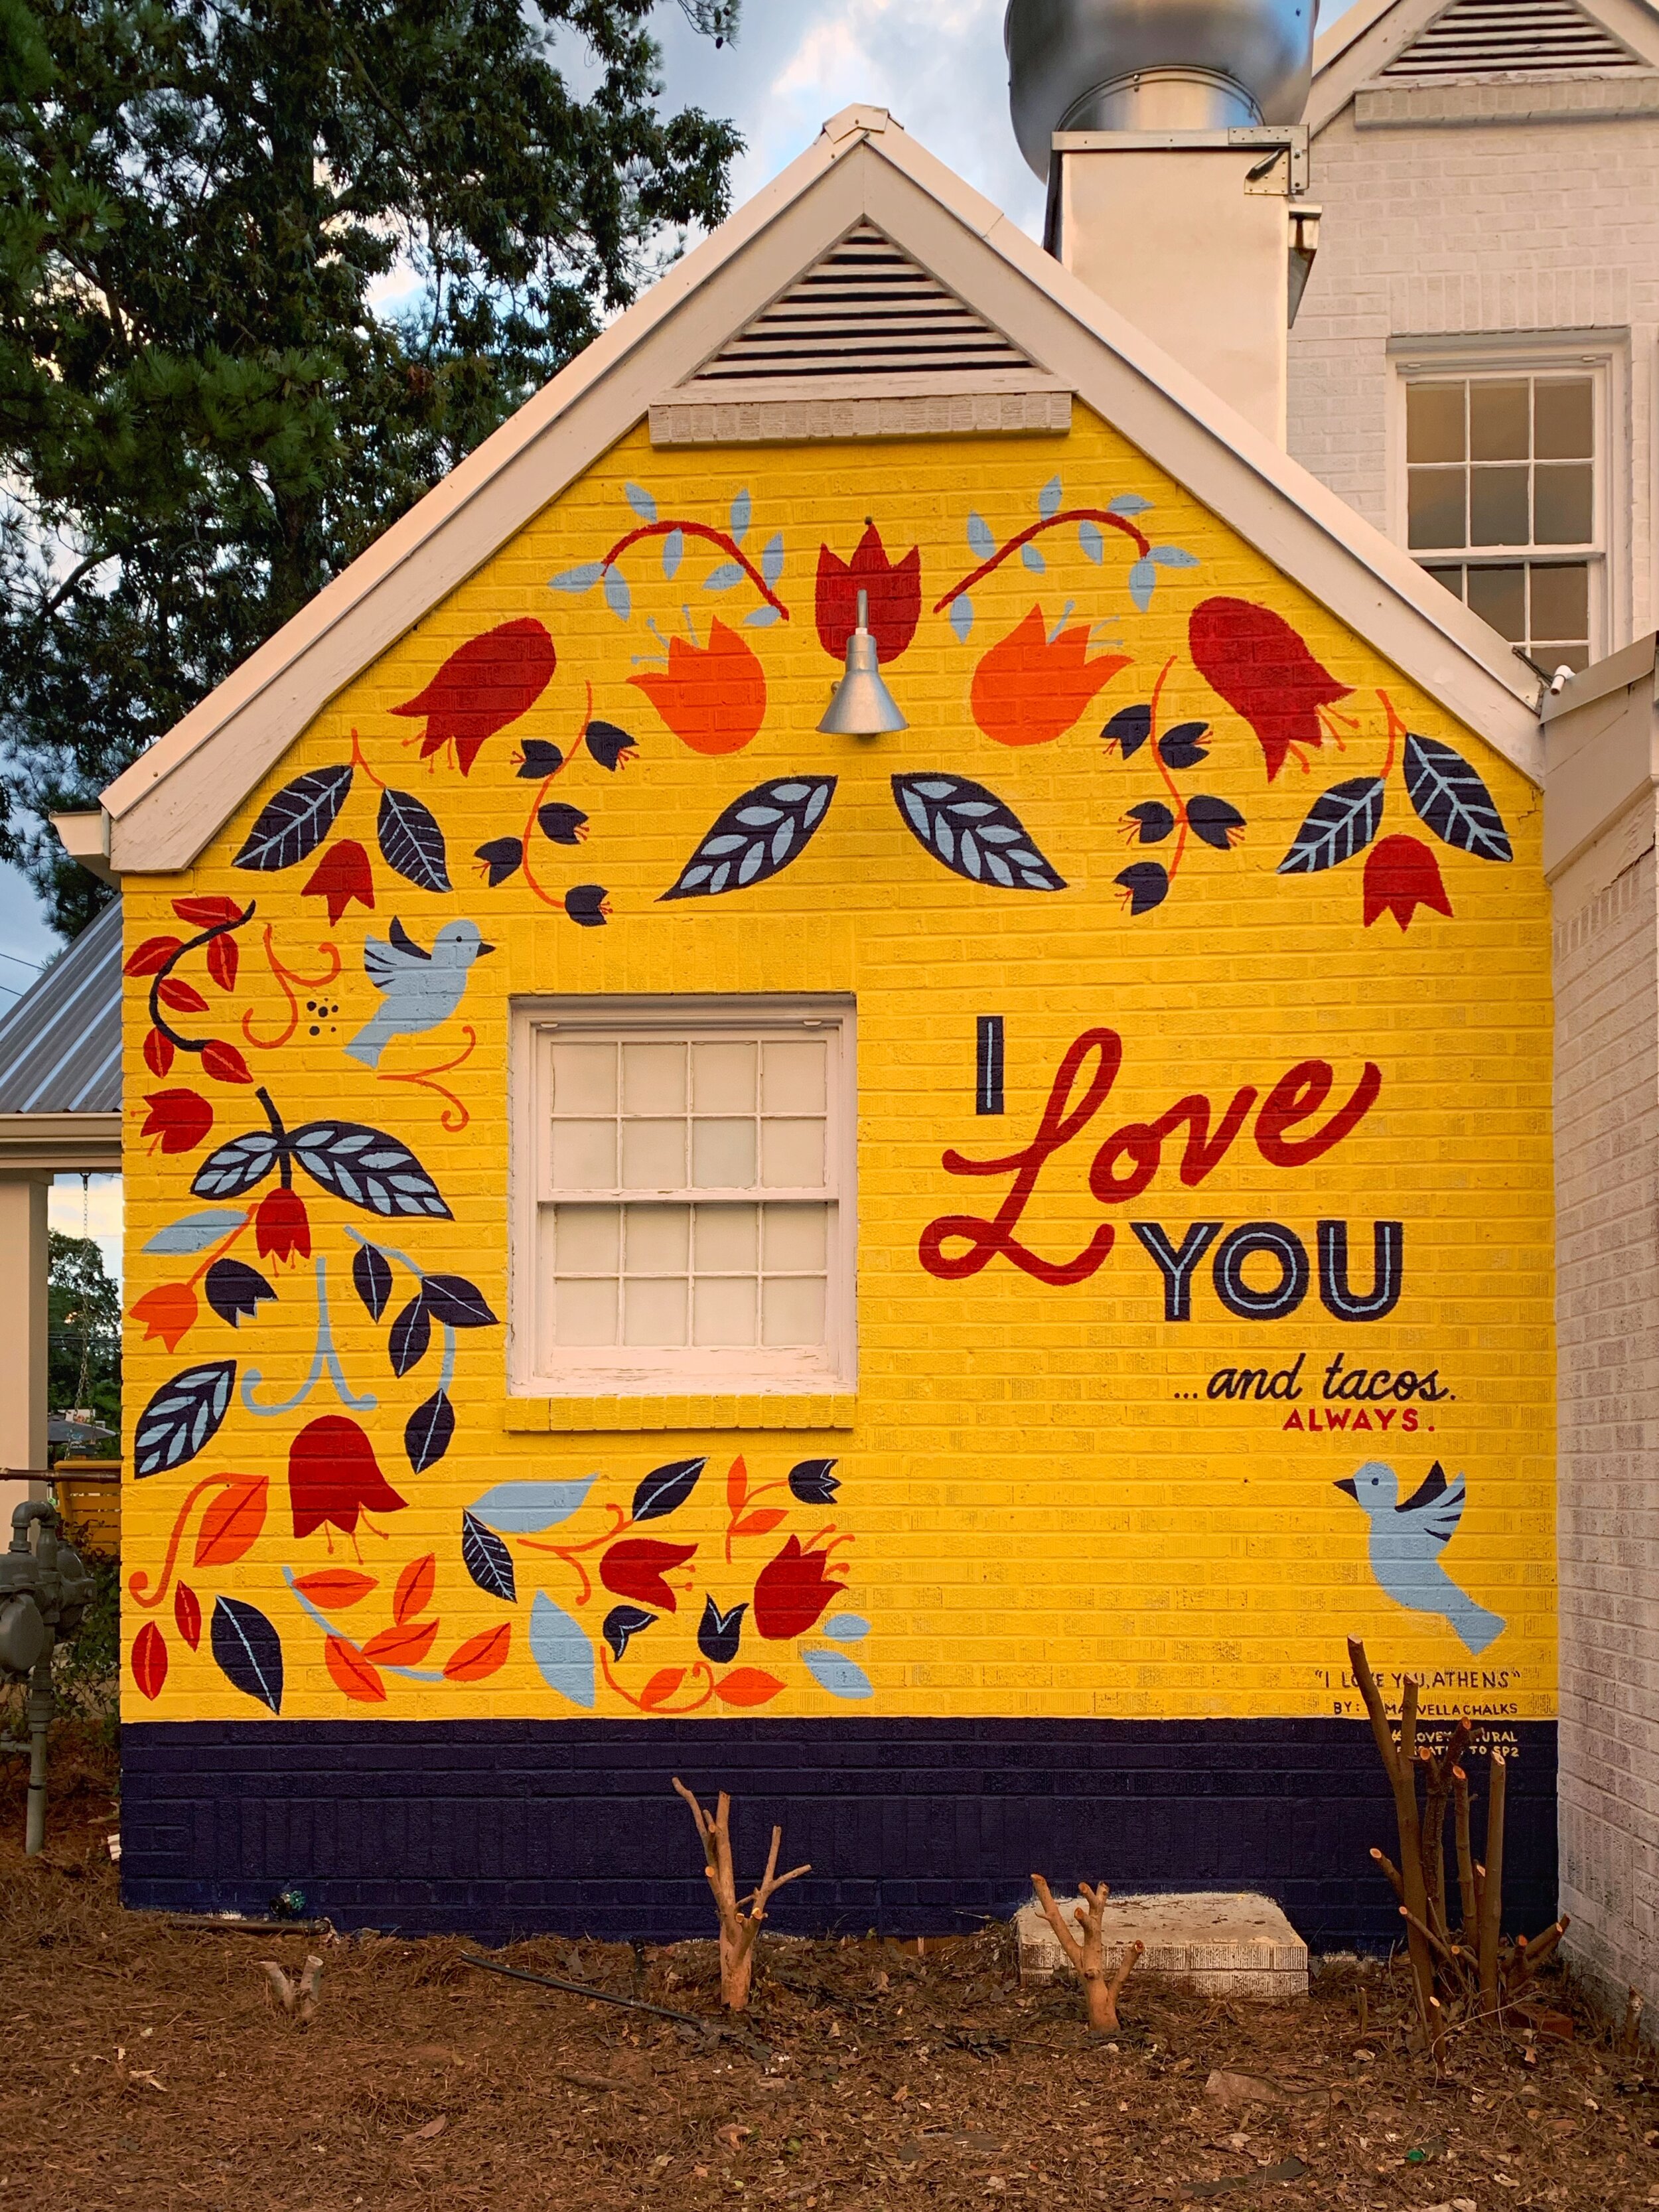 I Love You, Athens Mural